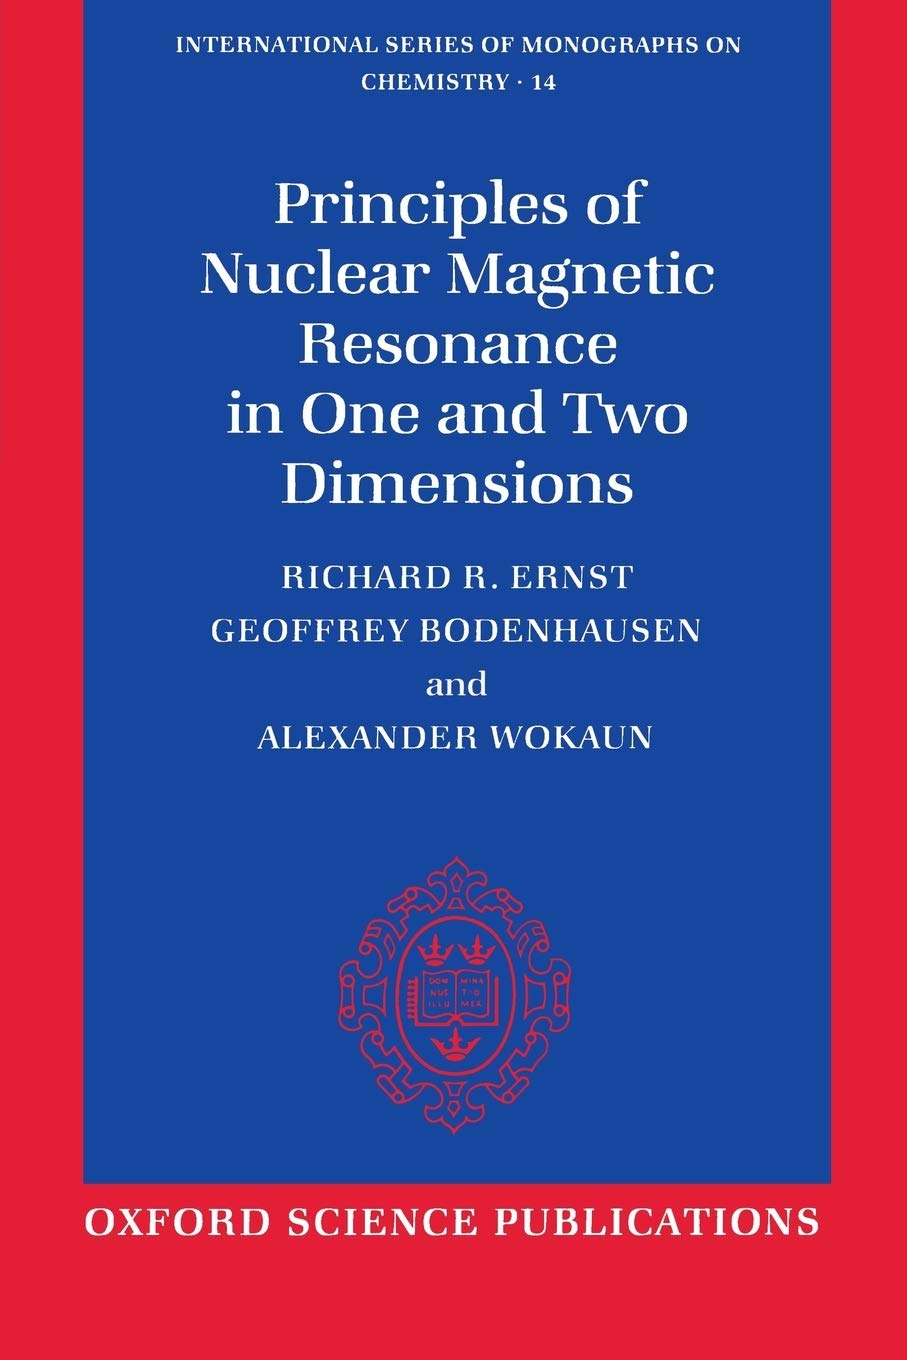 Principles of Nuclear Magnetic Resonance in One and Two Dimensions (International Series of Monographs on Chemistry, 14)